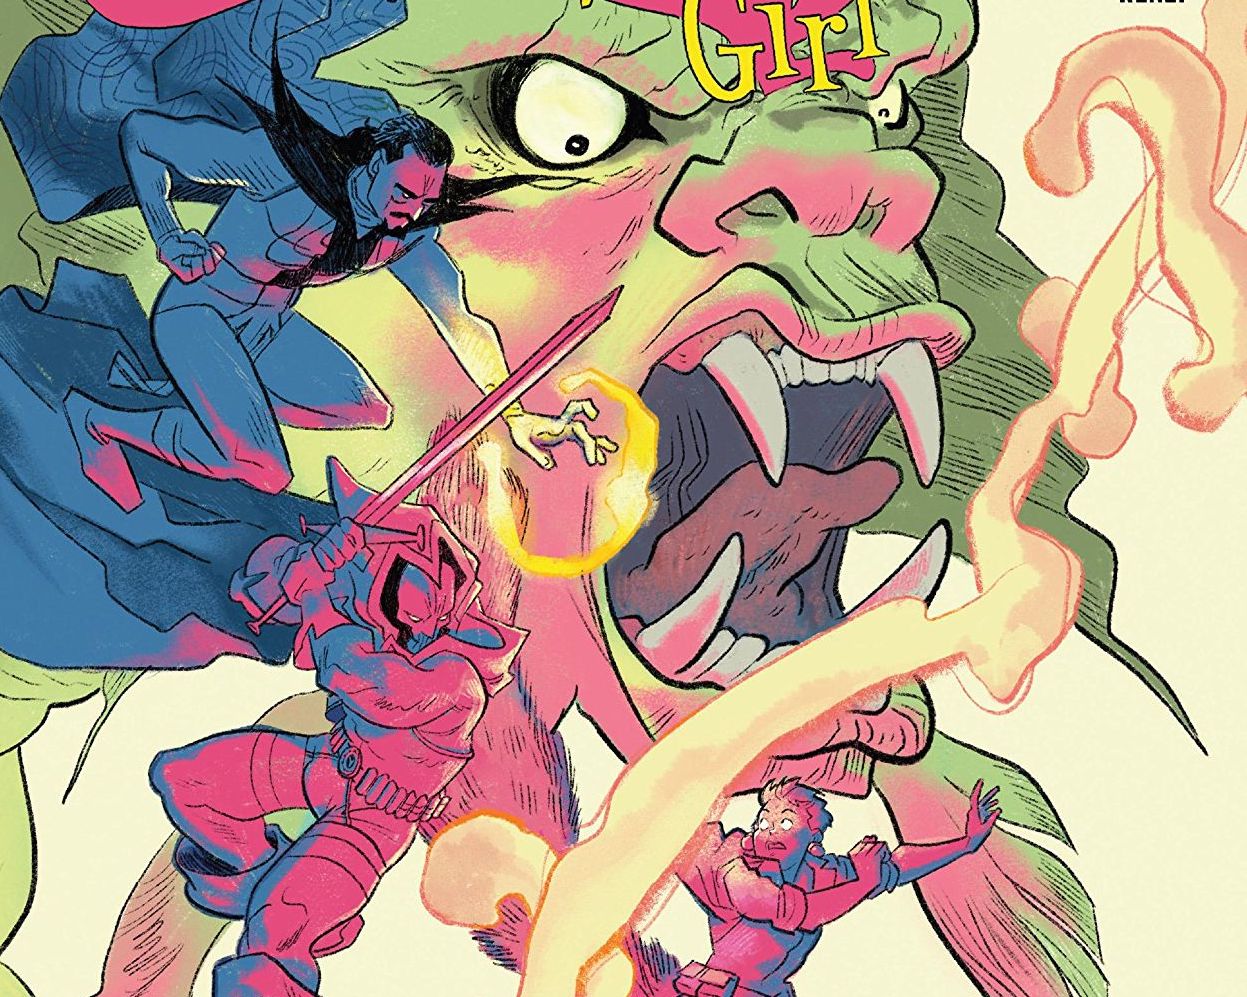 The Unbeatable Squirrel Girl #49 review